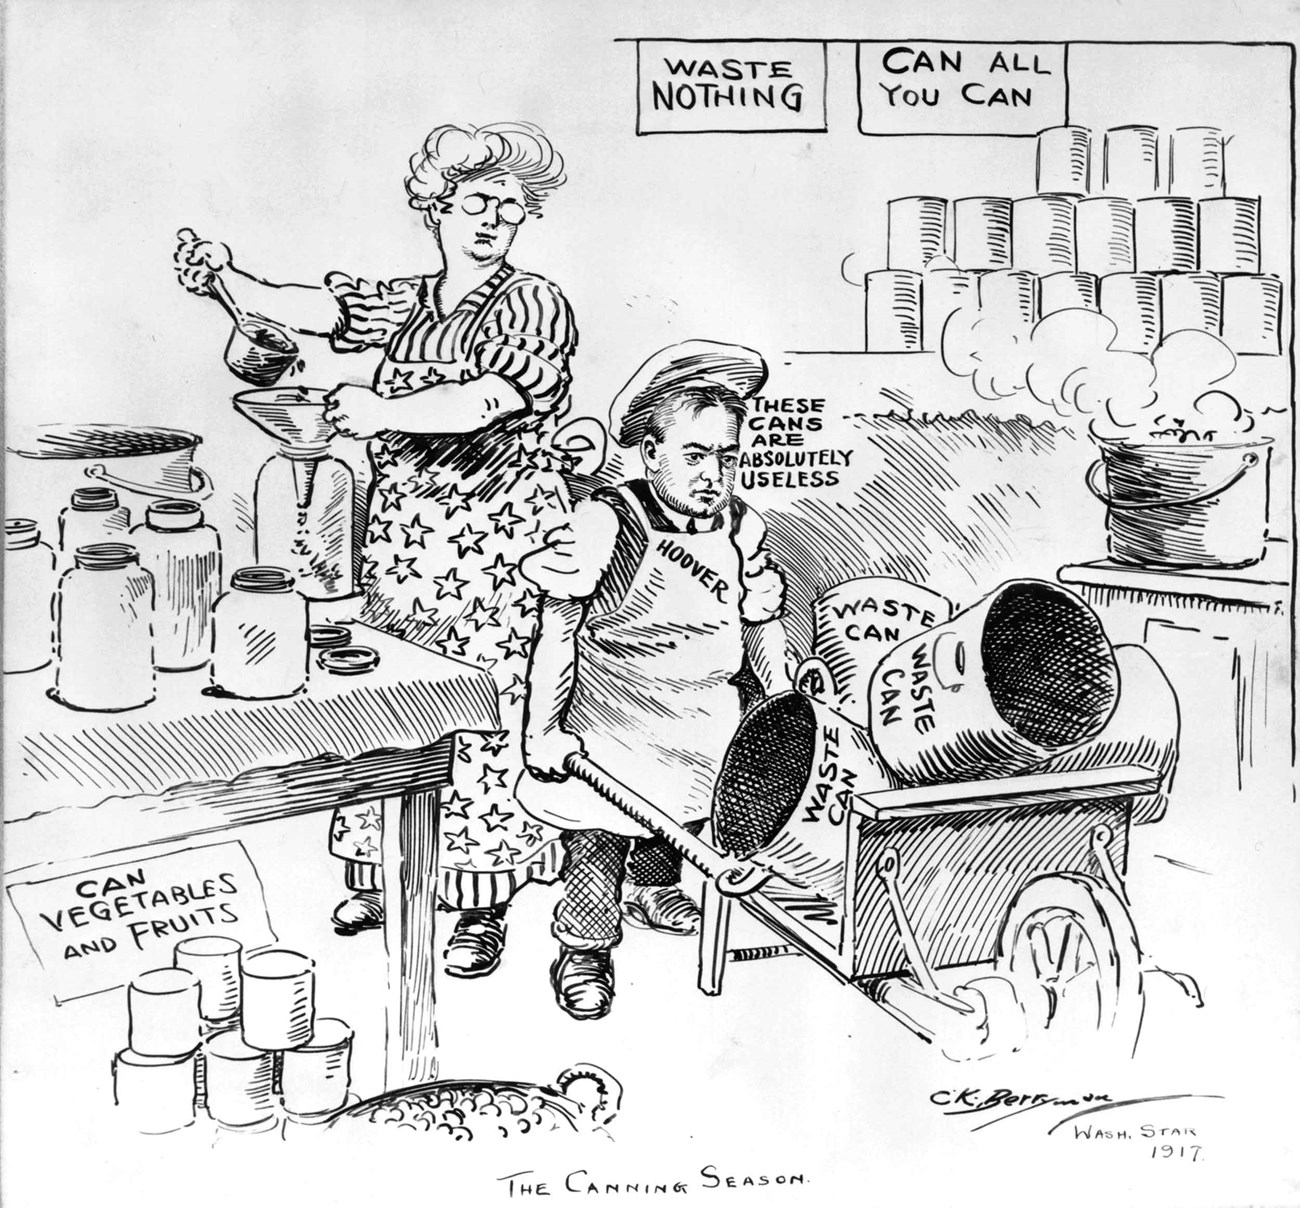 A political cartoon depicts a kitchen representing wartime food conservation.